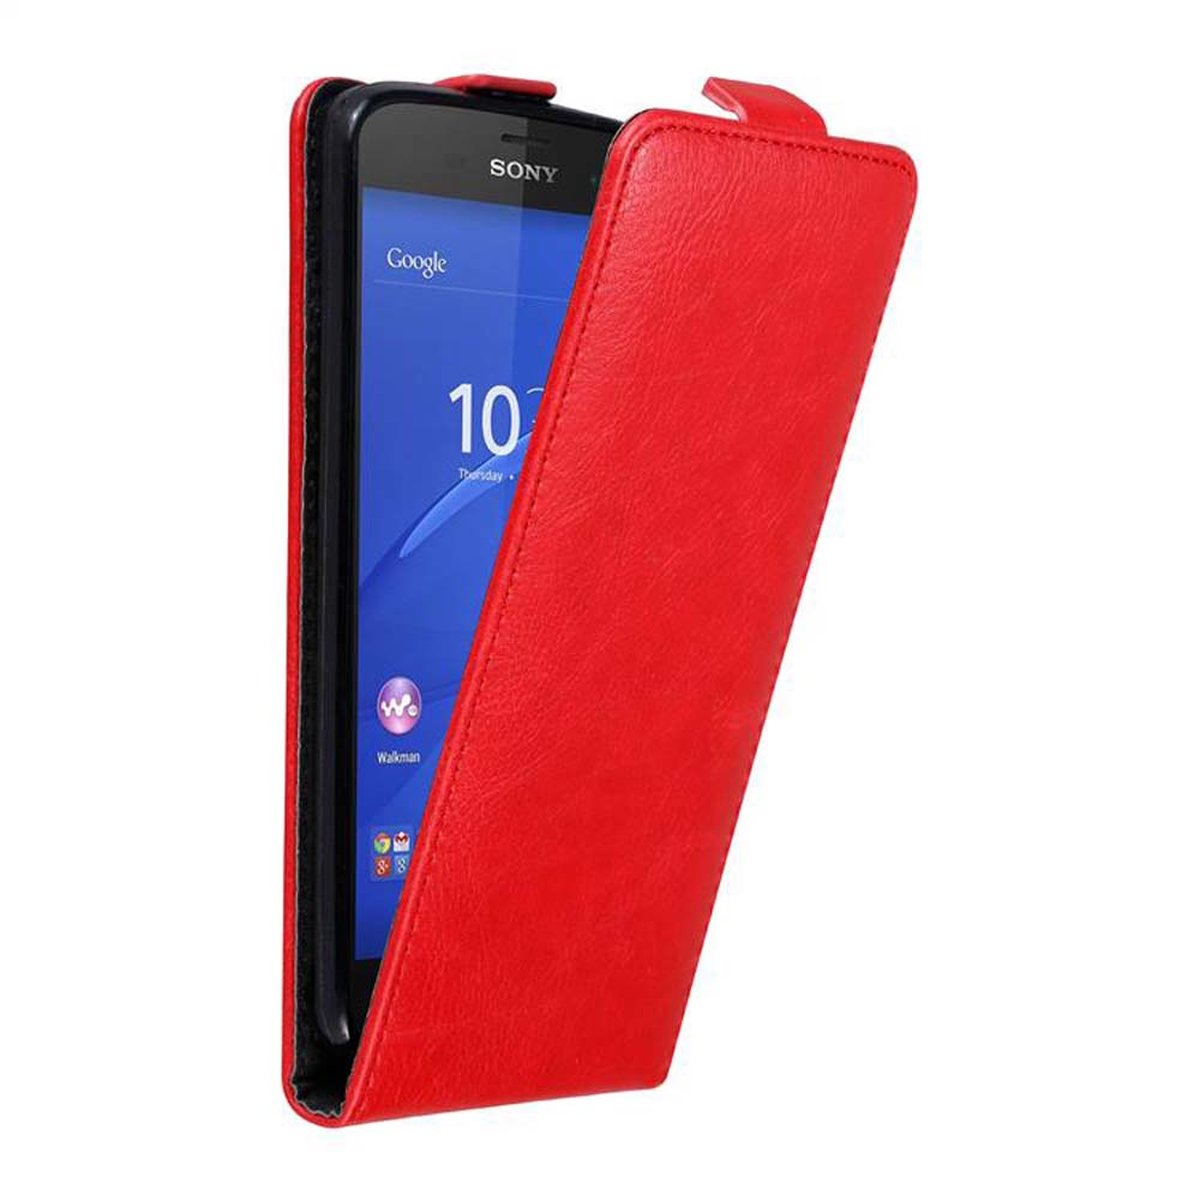 Sony, Xperia CADORABO Flip Hülle COMPACT, Style, Z3 ROT im APFEL Cover, Flip